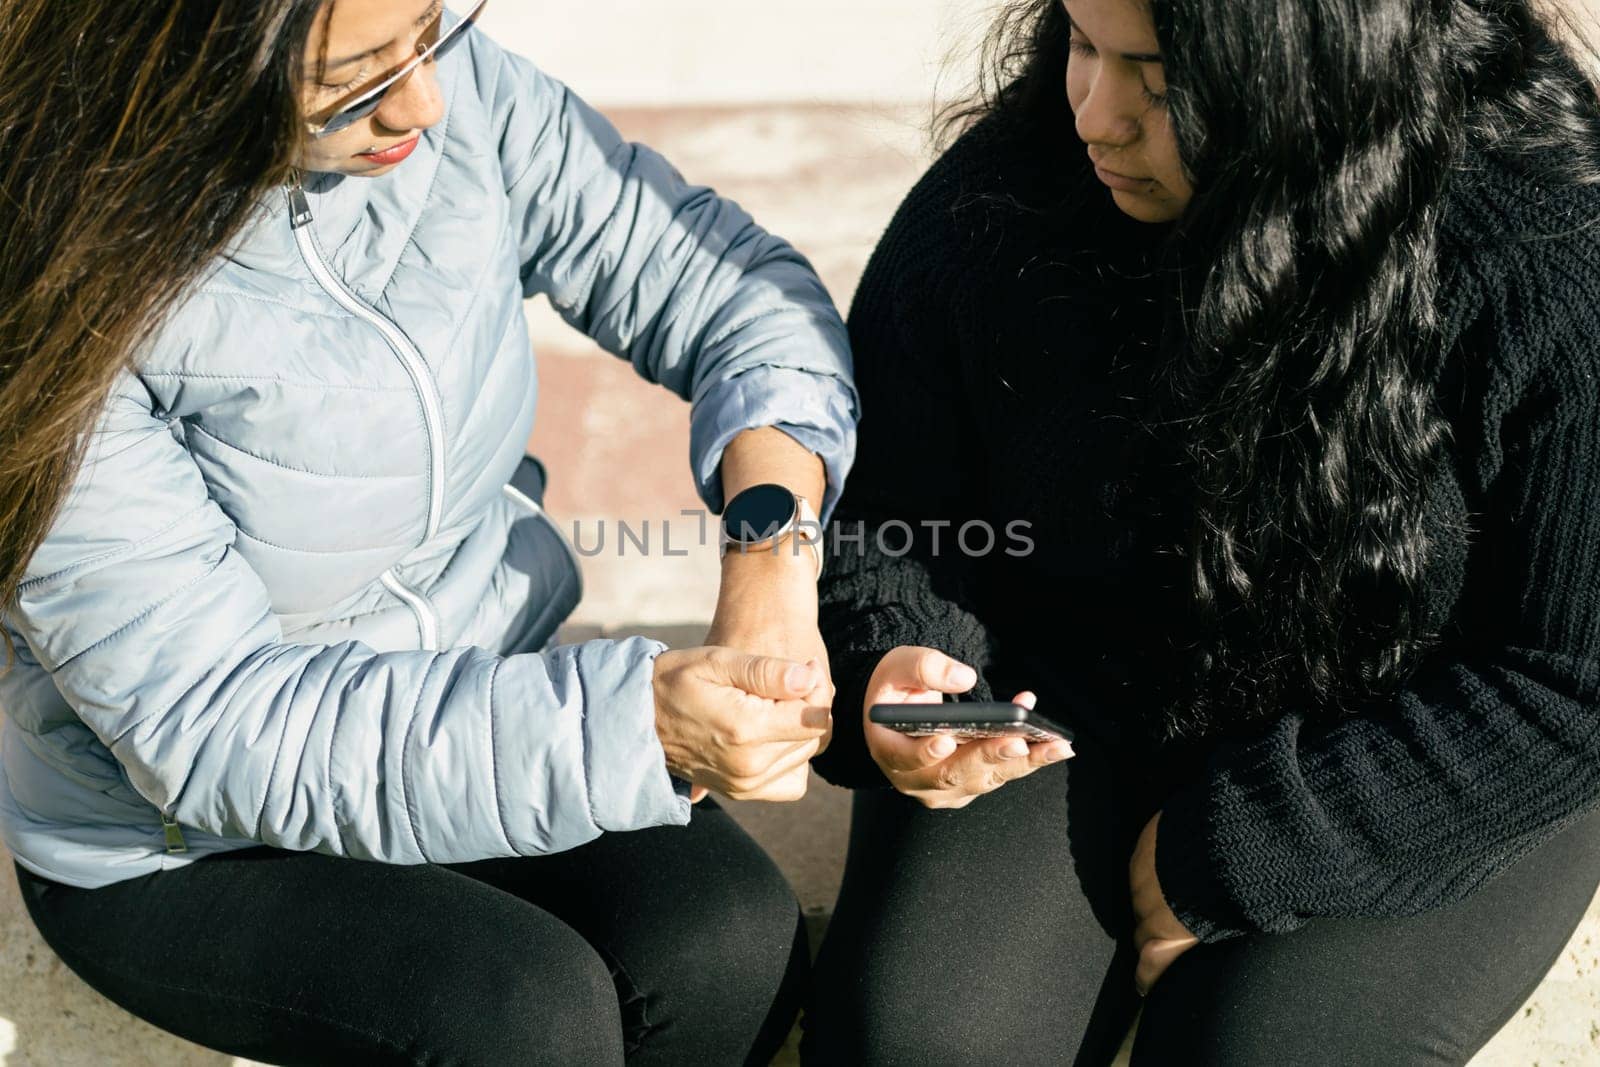 This stock photo features two Latin women sitting together and sharing data with smart electronic devices. Both women are looking at their respective devices, which are displaying information on their screens. One woman is holding a smartphone while the other has a tablet in front of her. The two women appear to be in a casual setting, perhaps a coffee shop or office break room, as they discuss the information they are sharing. This image could be used to represent modern communication and collaboration between colleagues, friends, or family members who are using technology to share information and stay connected.